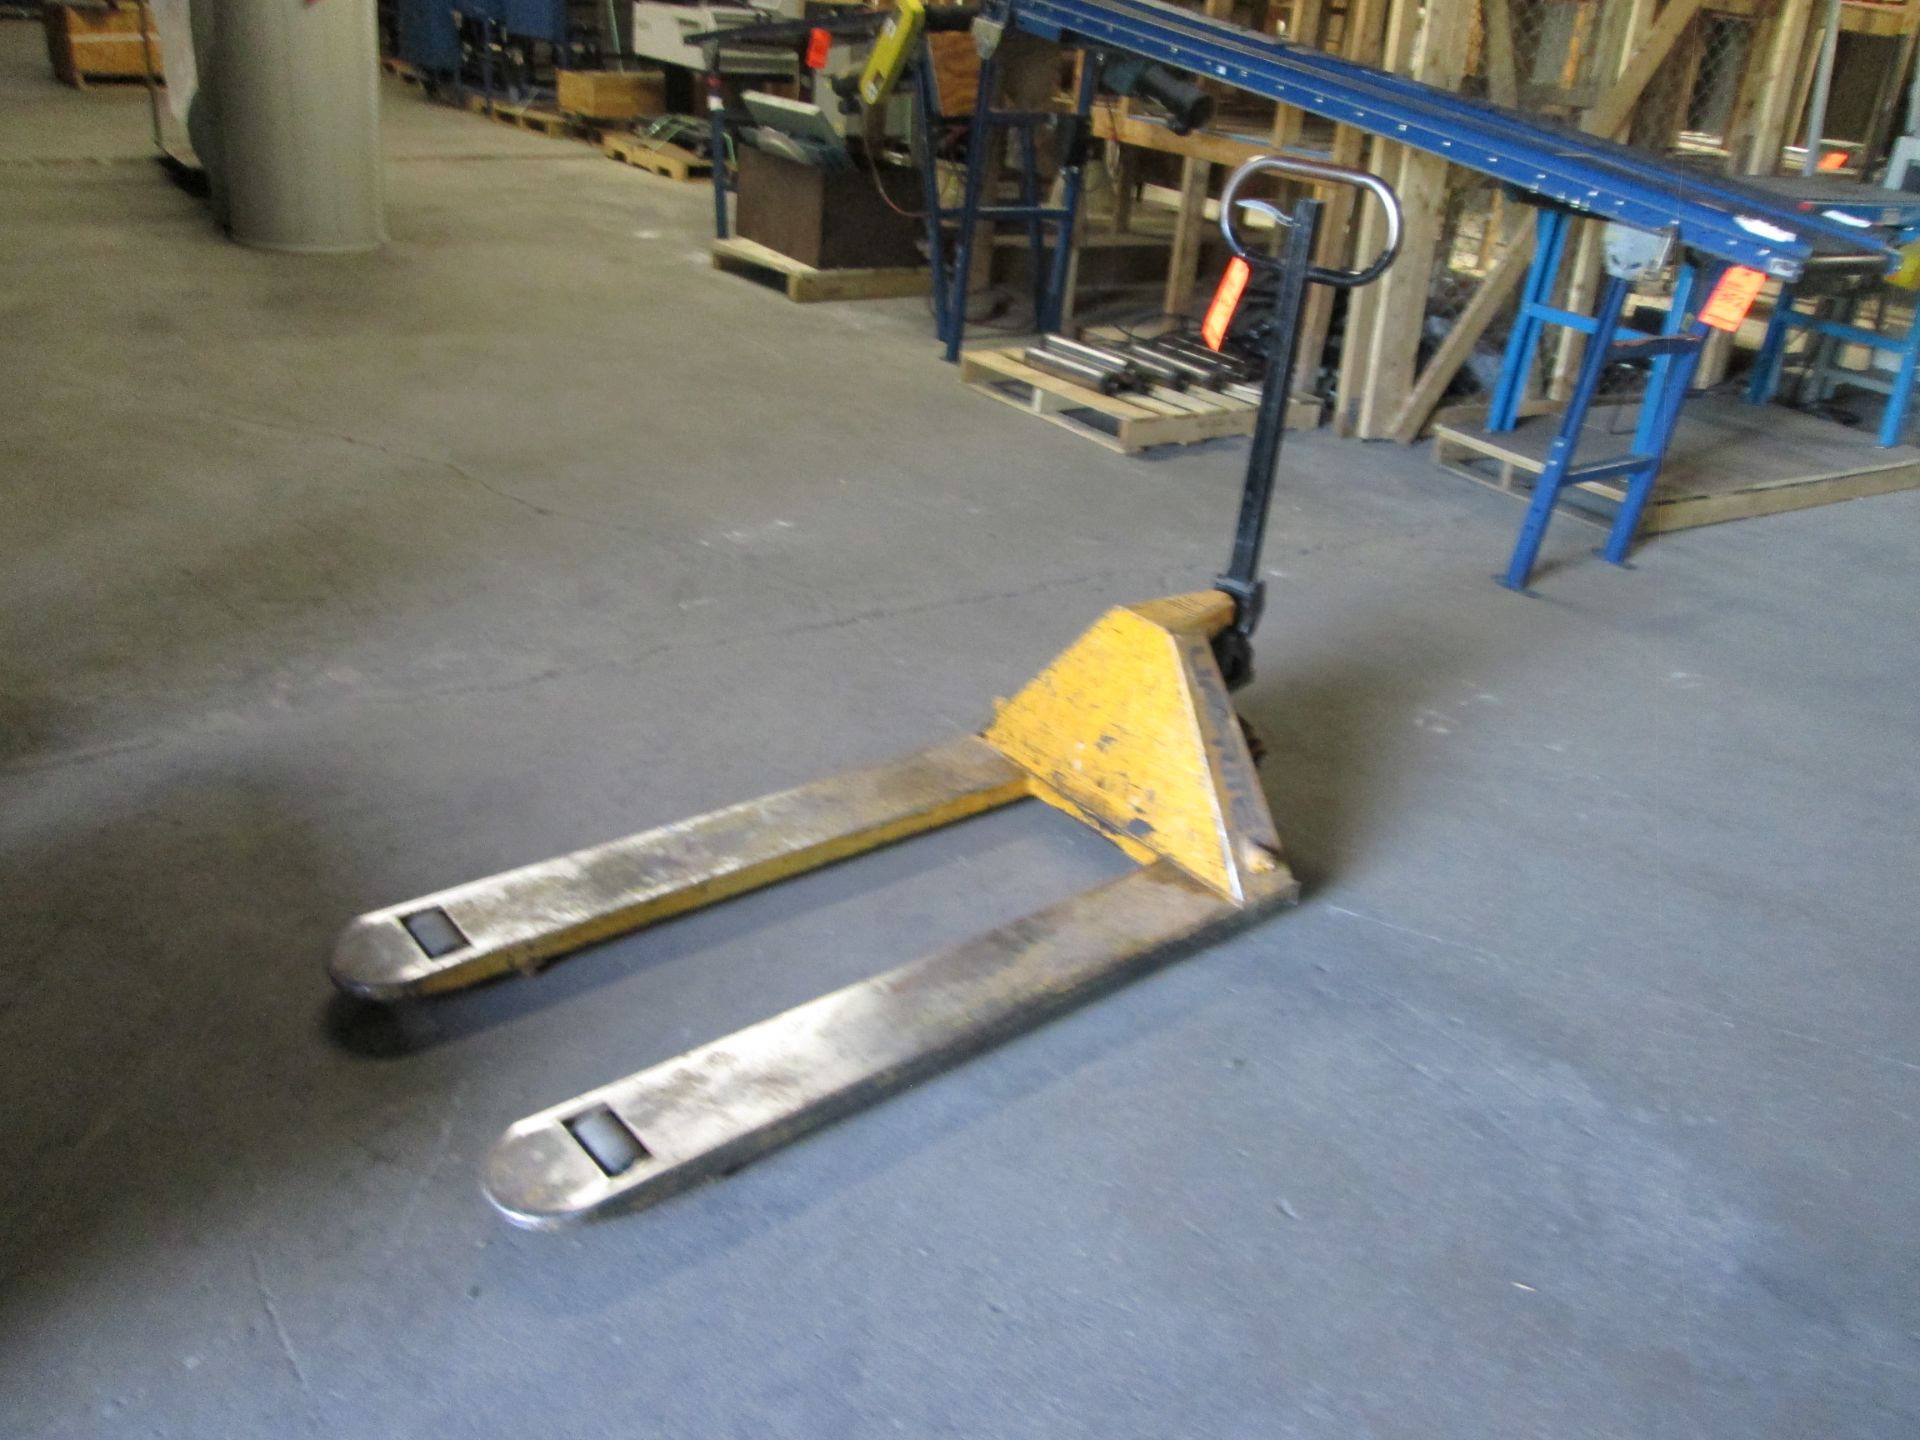 Lift Rite hydraulic pallet jack, 27 in. by 48 in. Forks, 5000 lb capacity - LOCATED AT 524 ROUTE 7